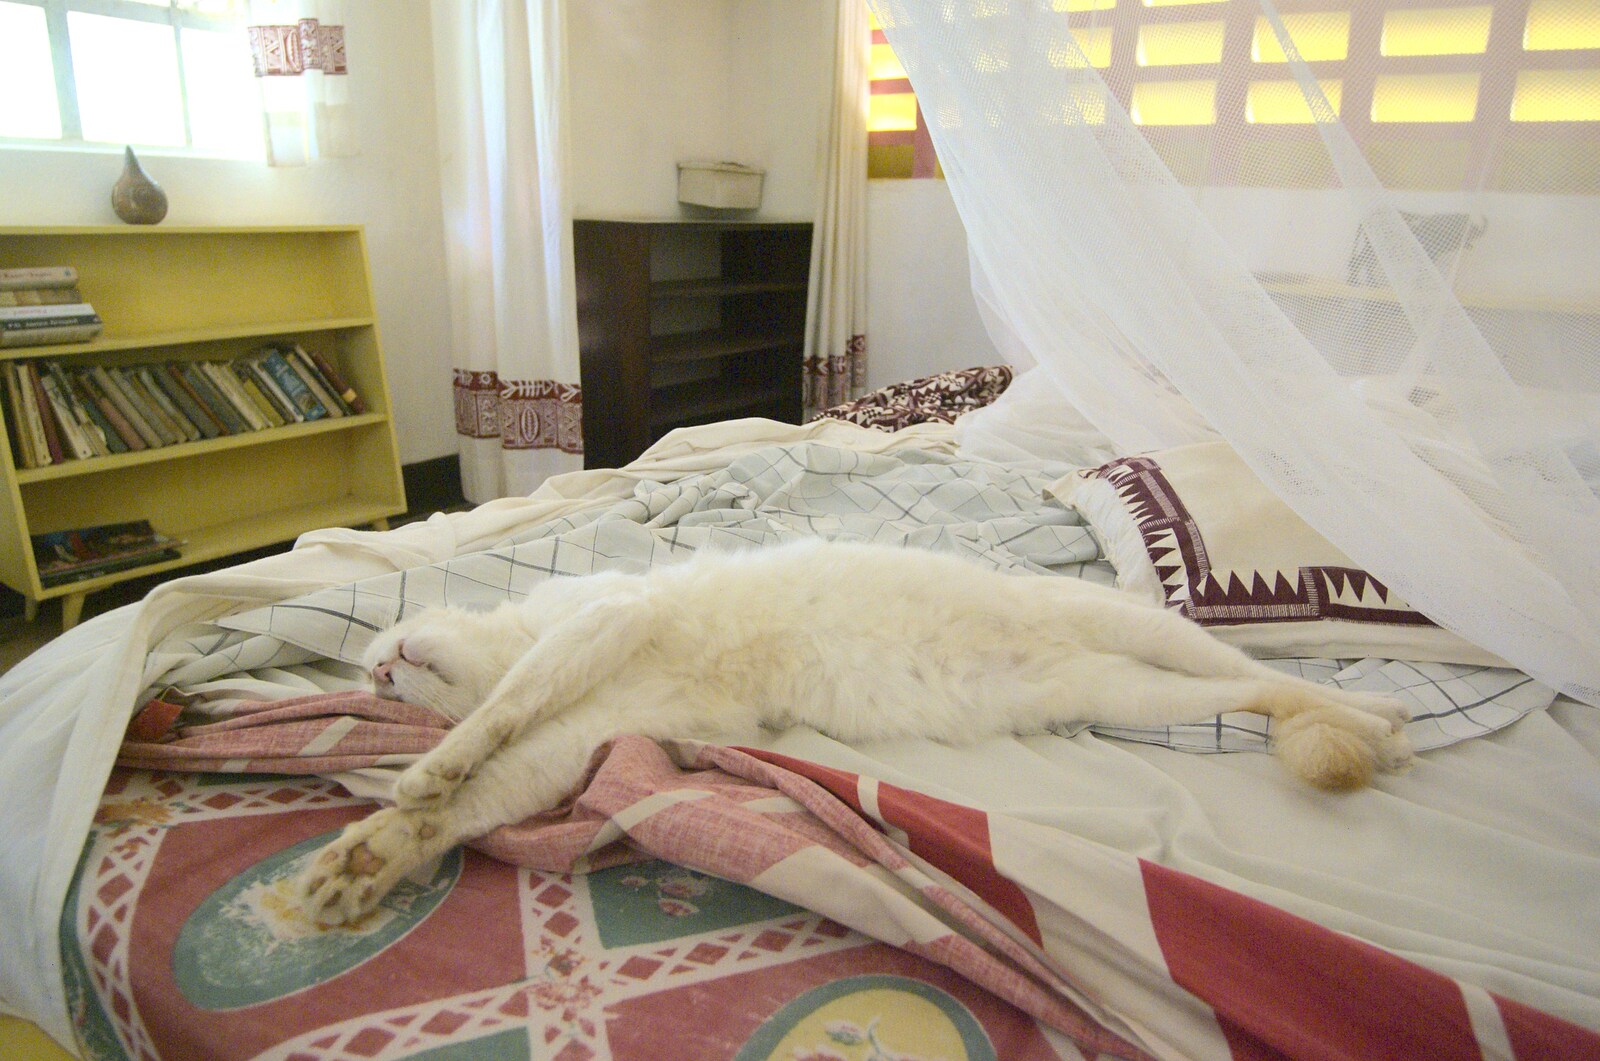 Patchy Cat sprawls out on our bed from Long Train (not) Runnin': Tiwi Beach, Mombasa, Kenya - 7th November 2010